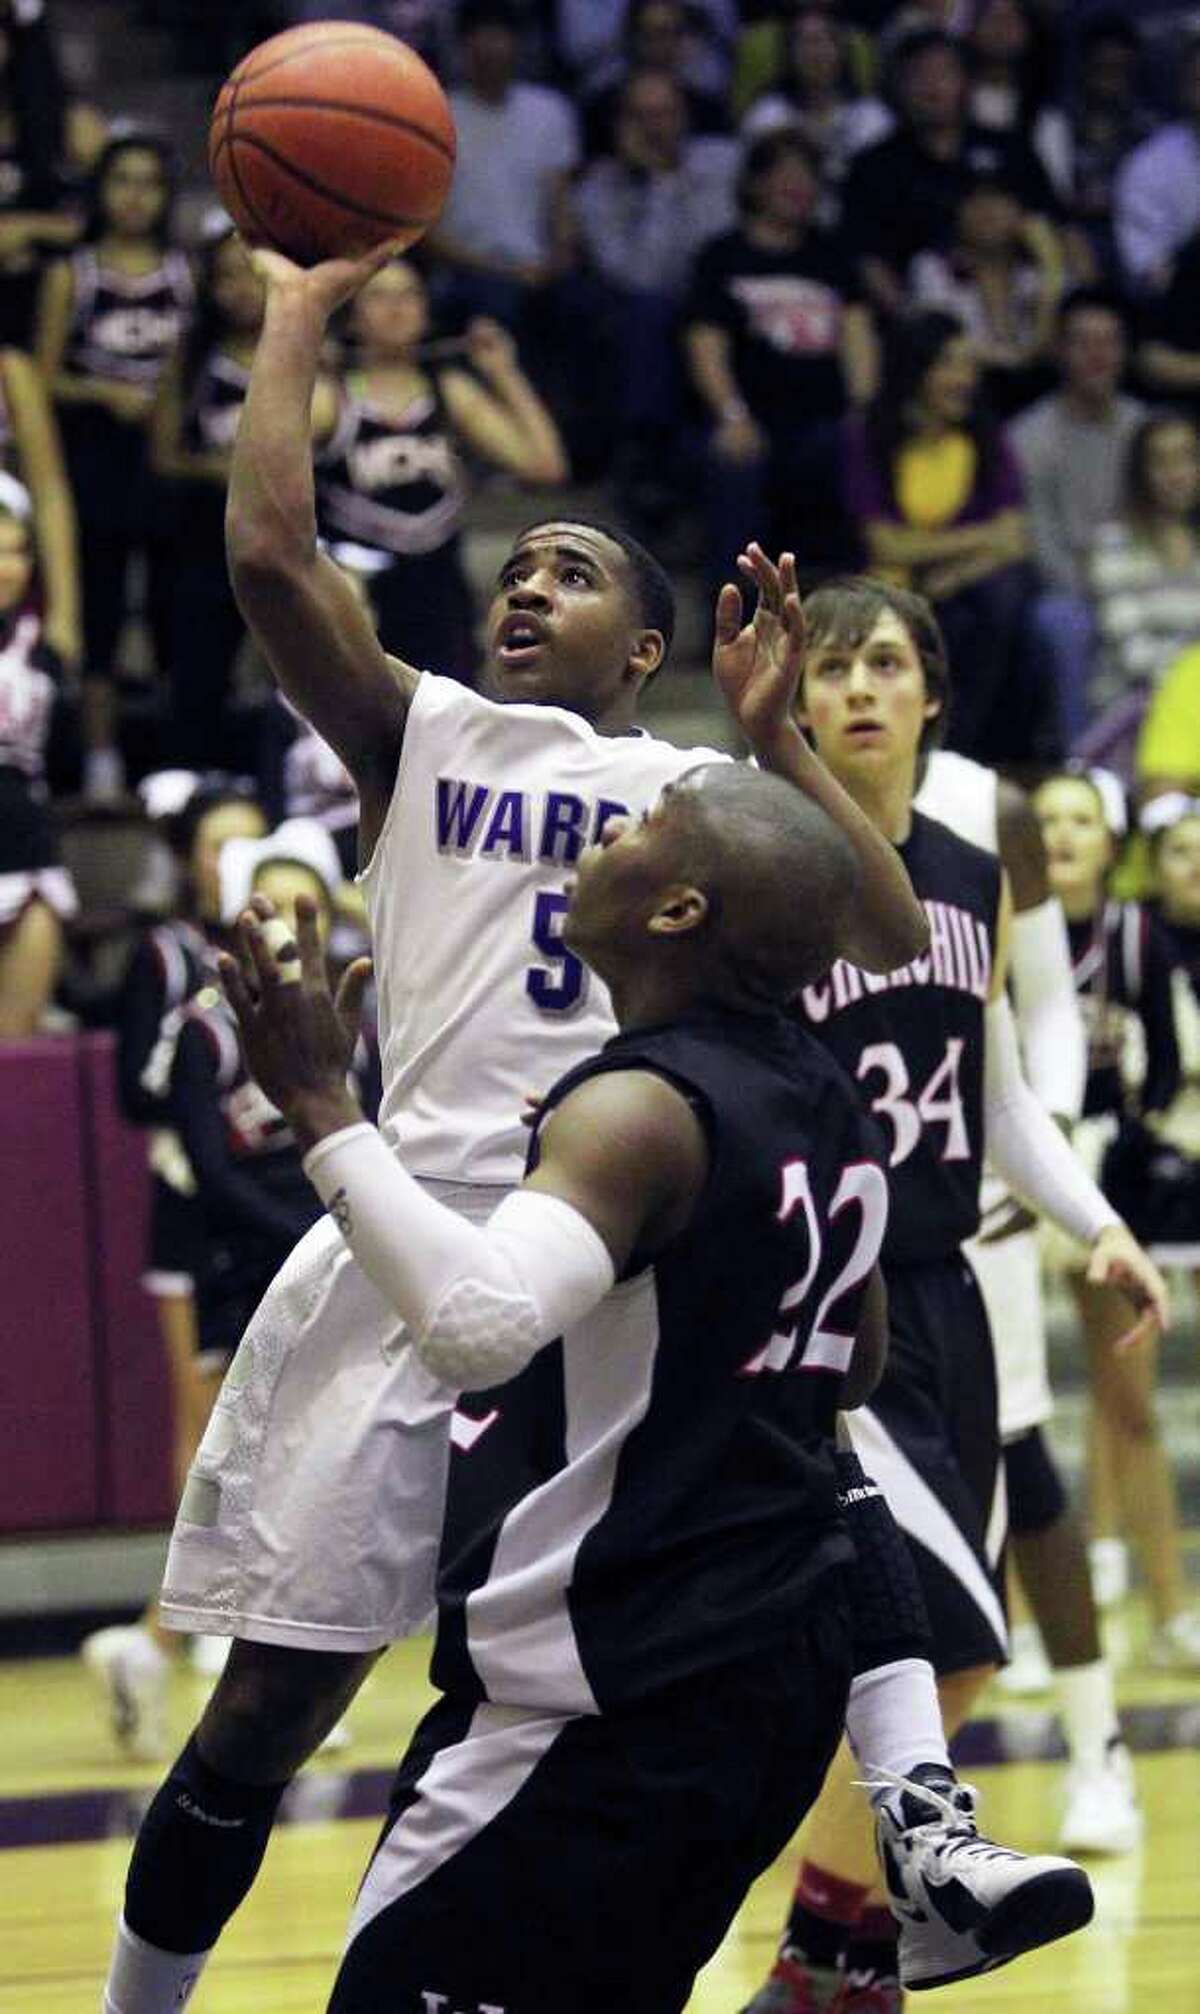 Marcus Keene scores all 11 of Warren’s fourth-quarter points, including the game-winning shot with 1.4 seconds left, giving the Warriors a thrilling 77-76 victory over Churchill.